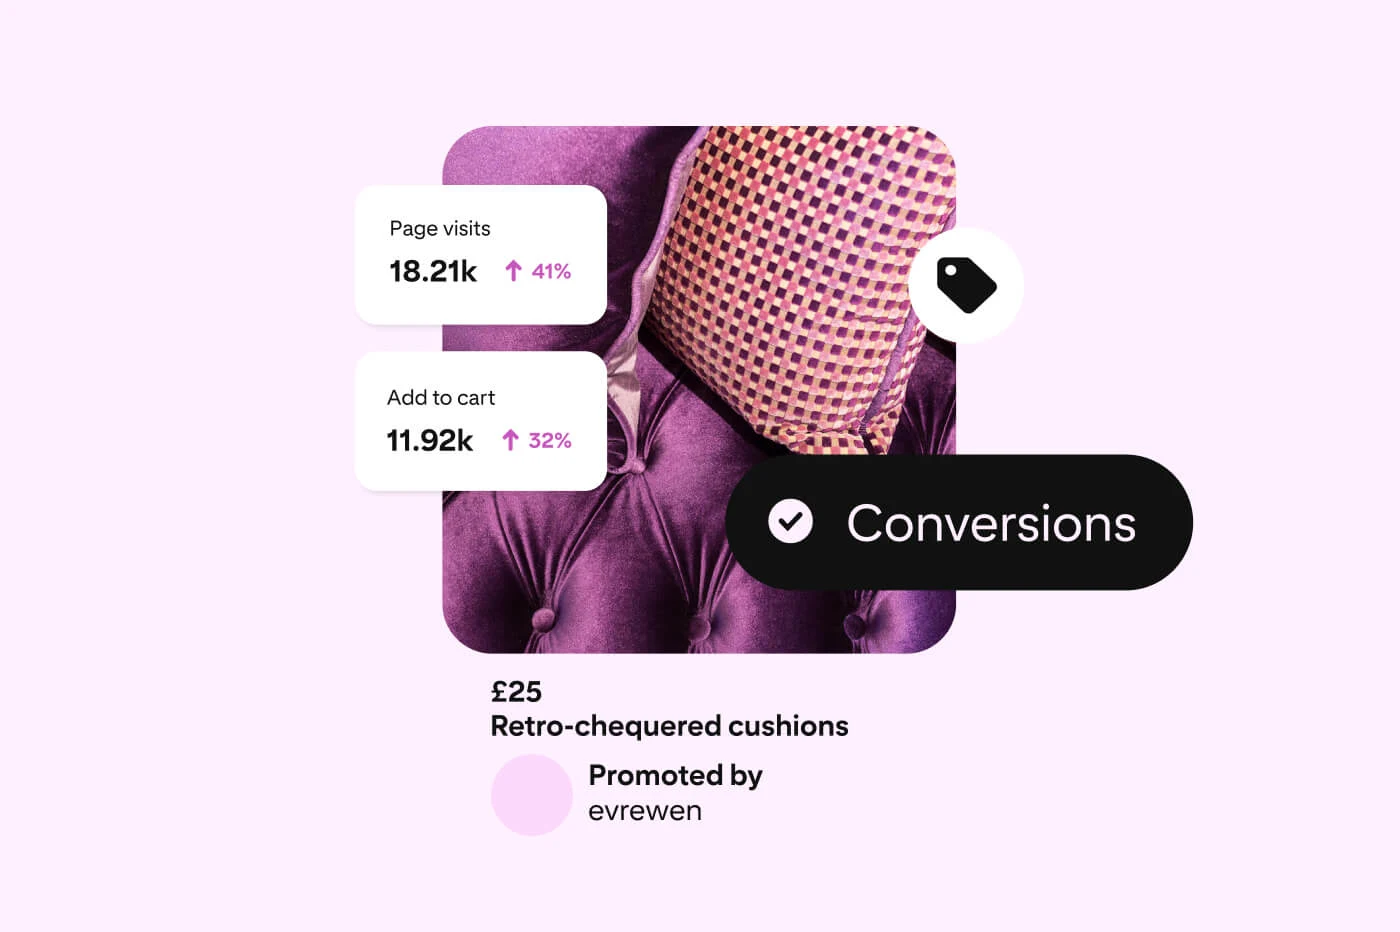 A Pin for retro-chequered cushions. The Pin is on a pink background. There is a 'Shop now' button and a tag that indicates the campaign is optimised for conversions. Page visits and adds-to-cart are also represented.